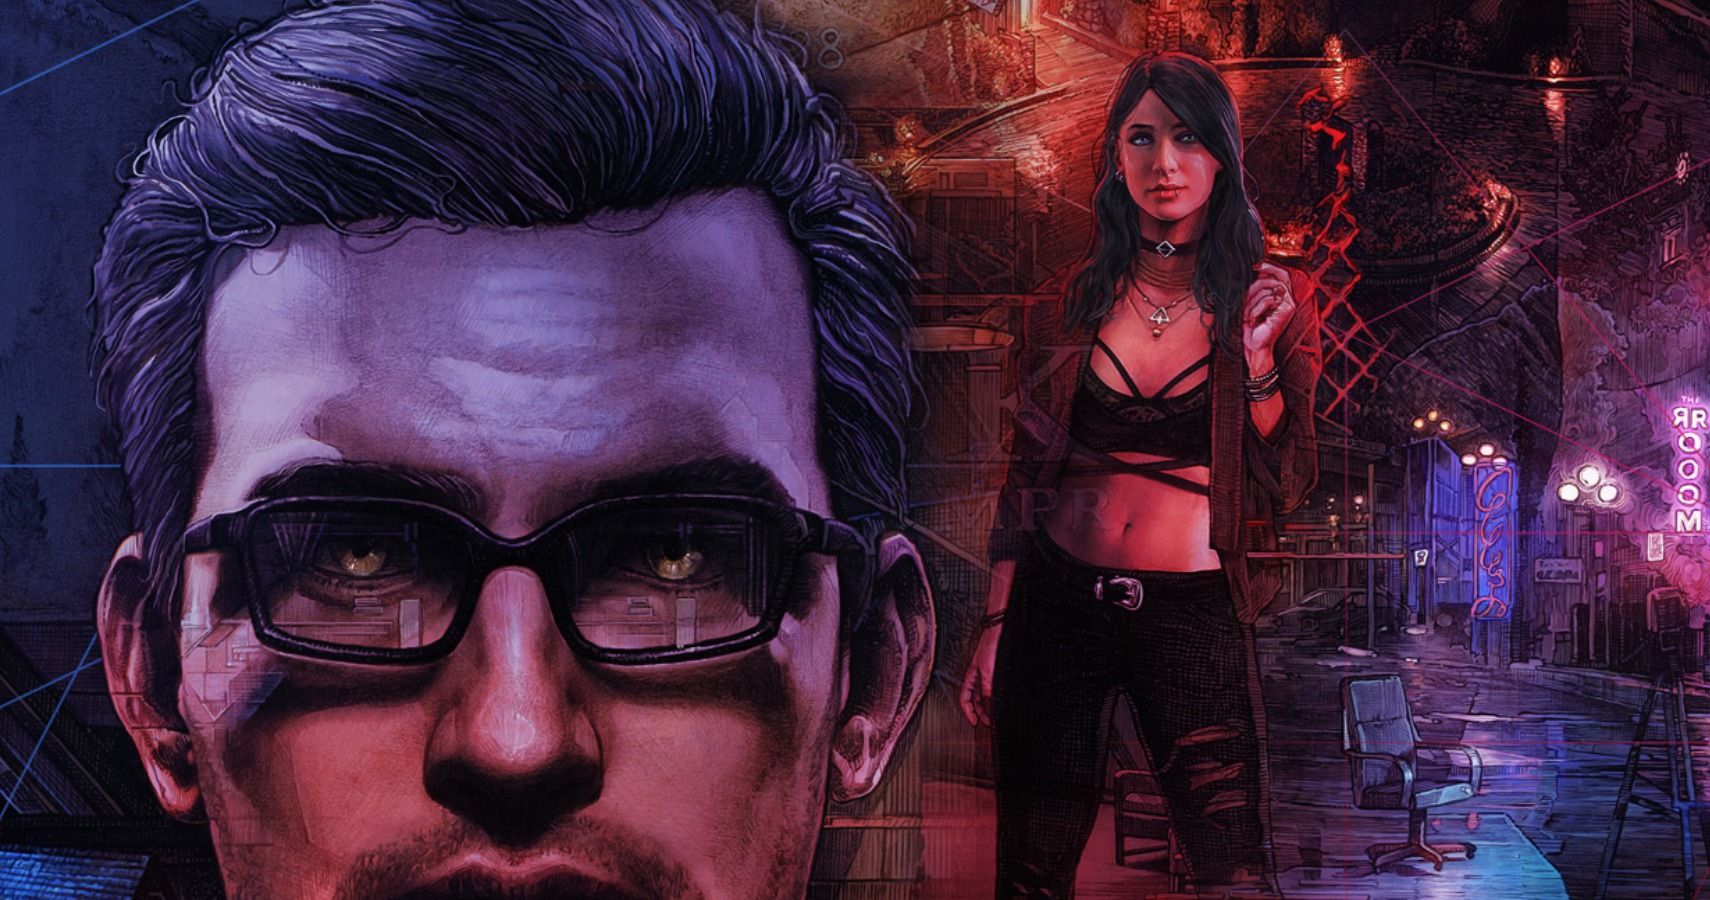 Vampire: The Masquerade – Bloodlines 2 Reveals the Part-Vamp, Part-Witch  Tremere Clan